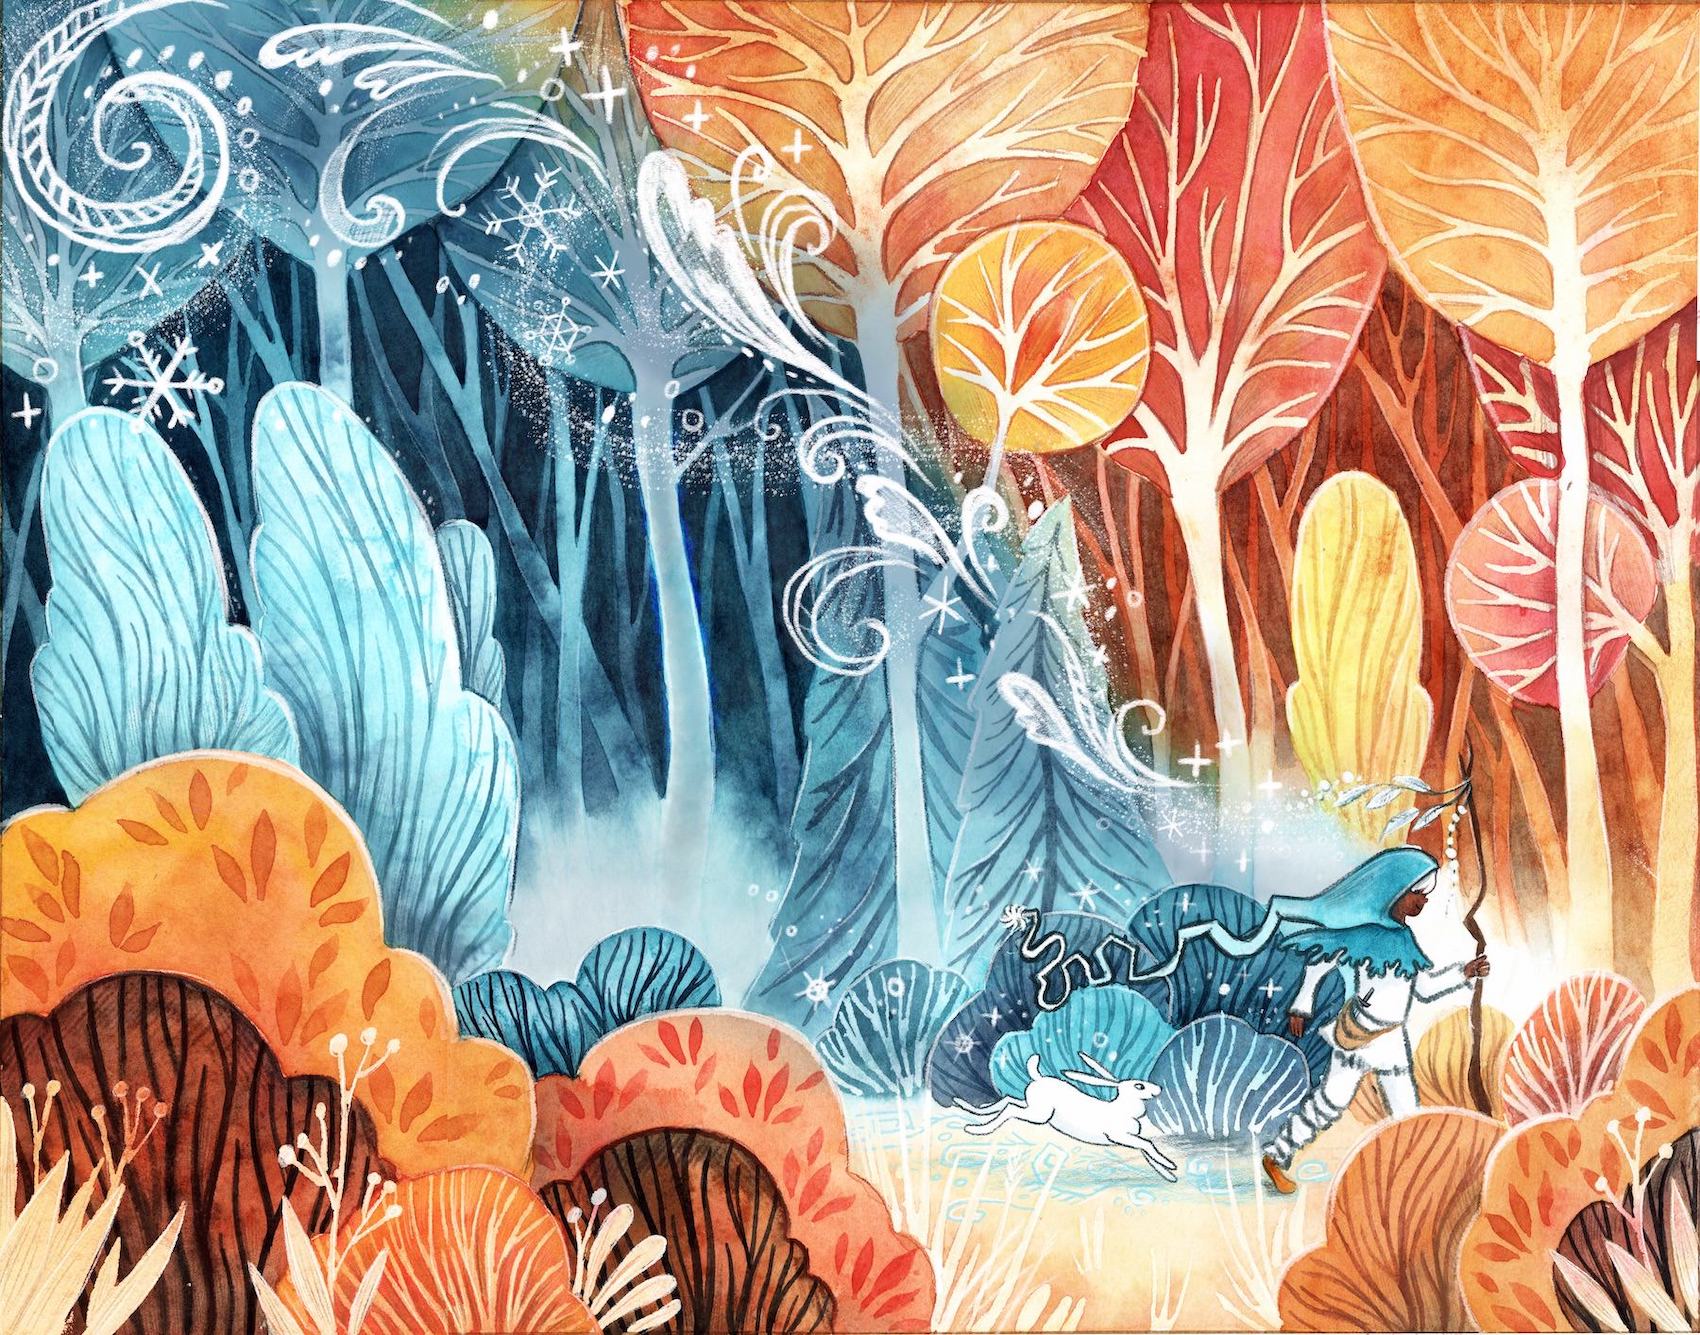 Whimsical watercolor illustration showing Jack Frost walking through an autumn forest. The trees and bushes are red and gold in front of him, and cold is trailing behind him, turning the trees and bushes to blue in his wake. Frosty swirls and snowflakes swirl at the edge of the blue. A white rabbit frolics behind Jack.